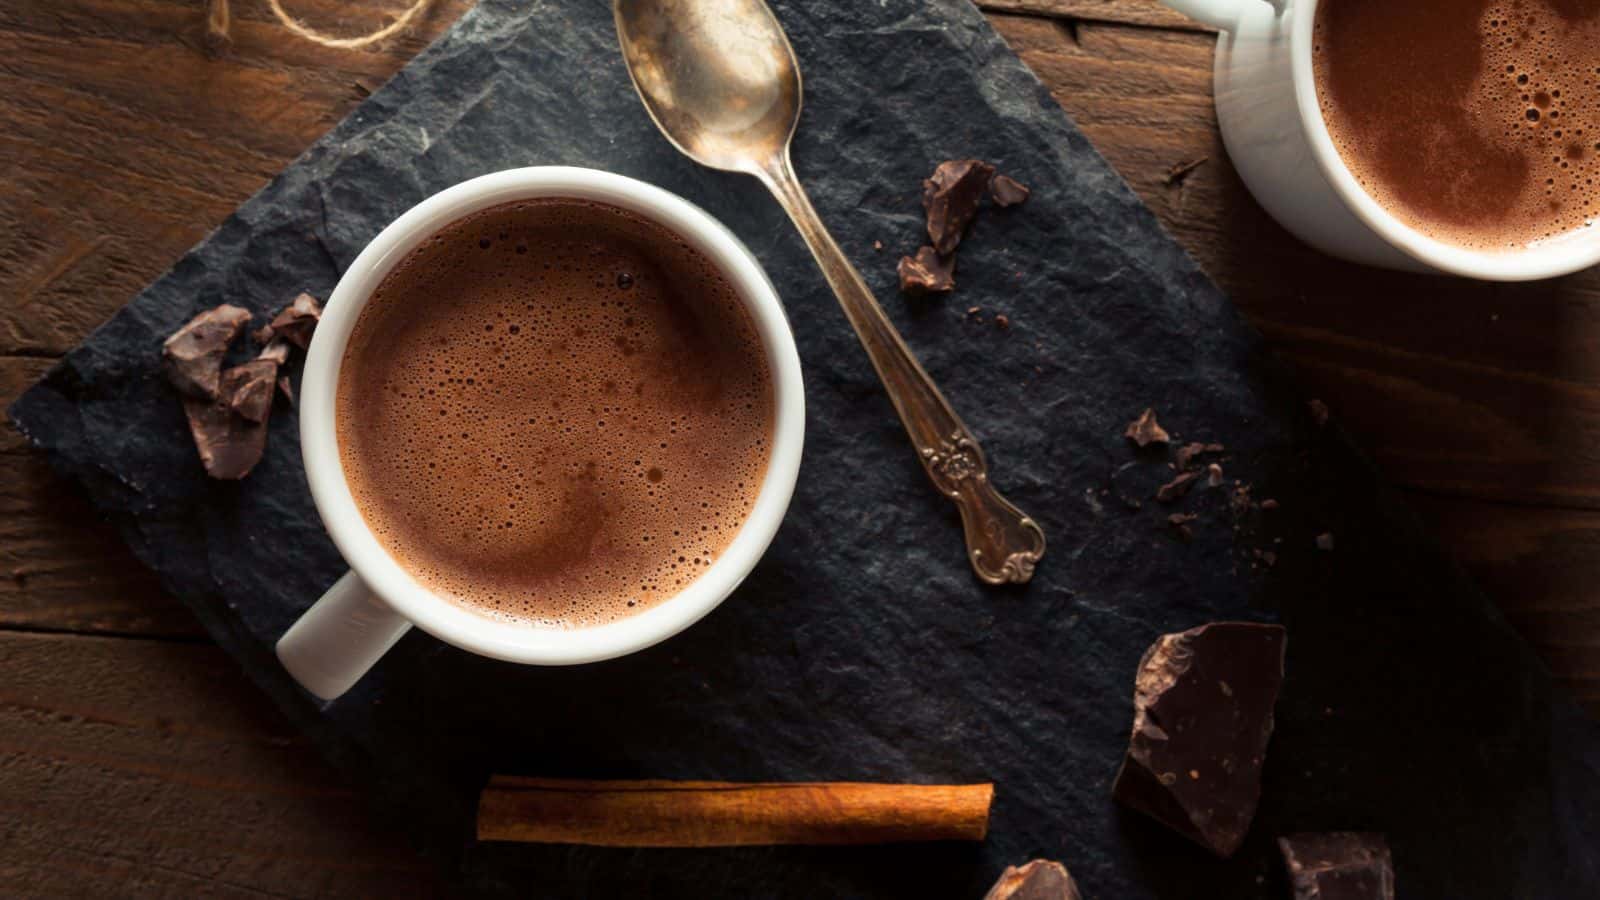 Hot chocolate in a white mug with silver spoon and ingredients around.